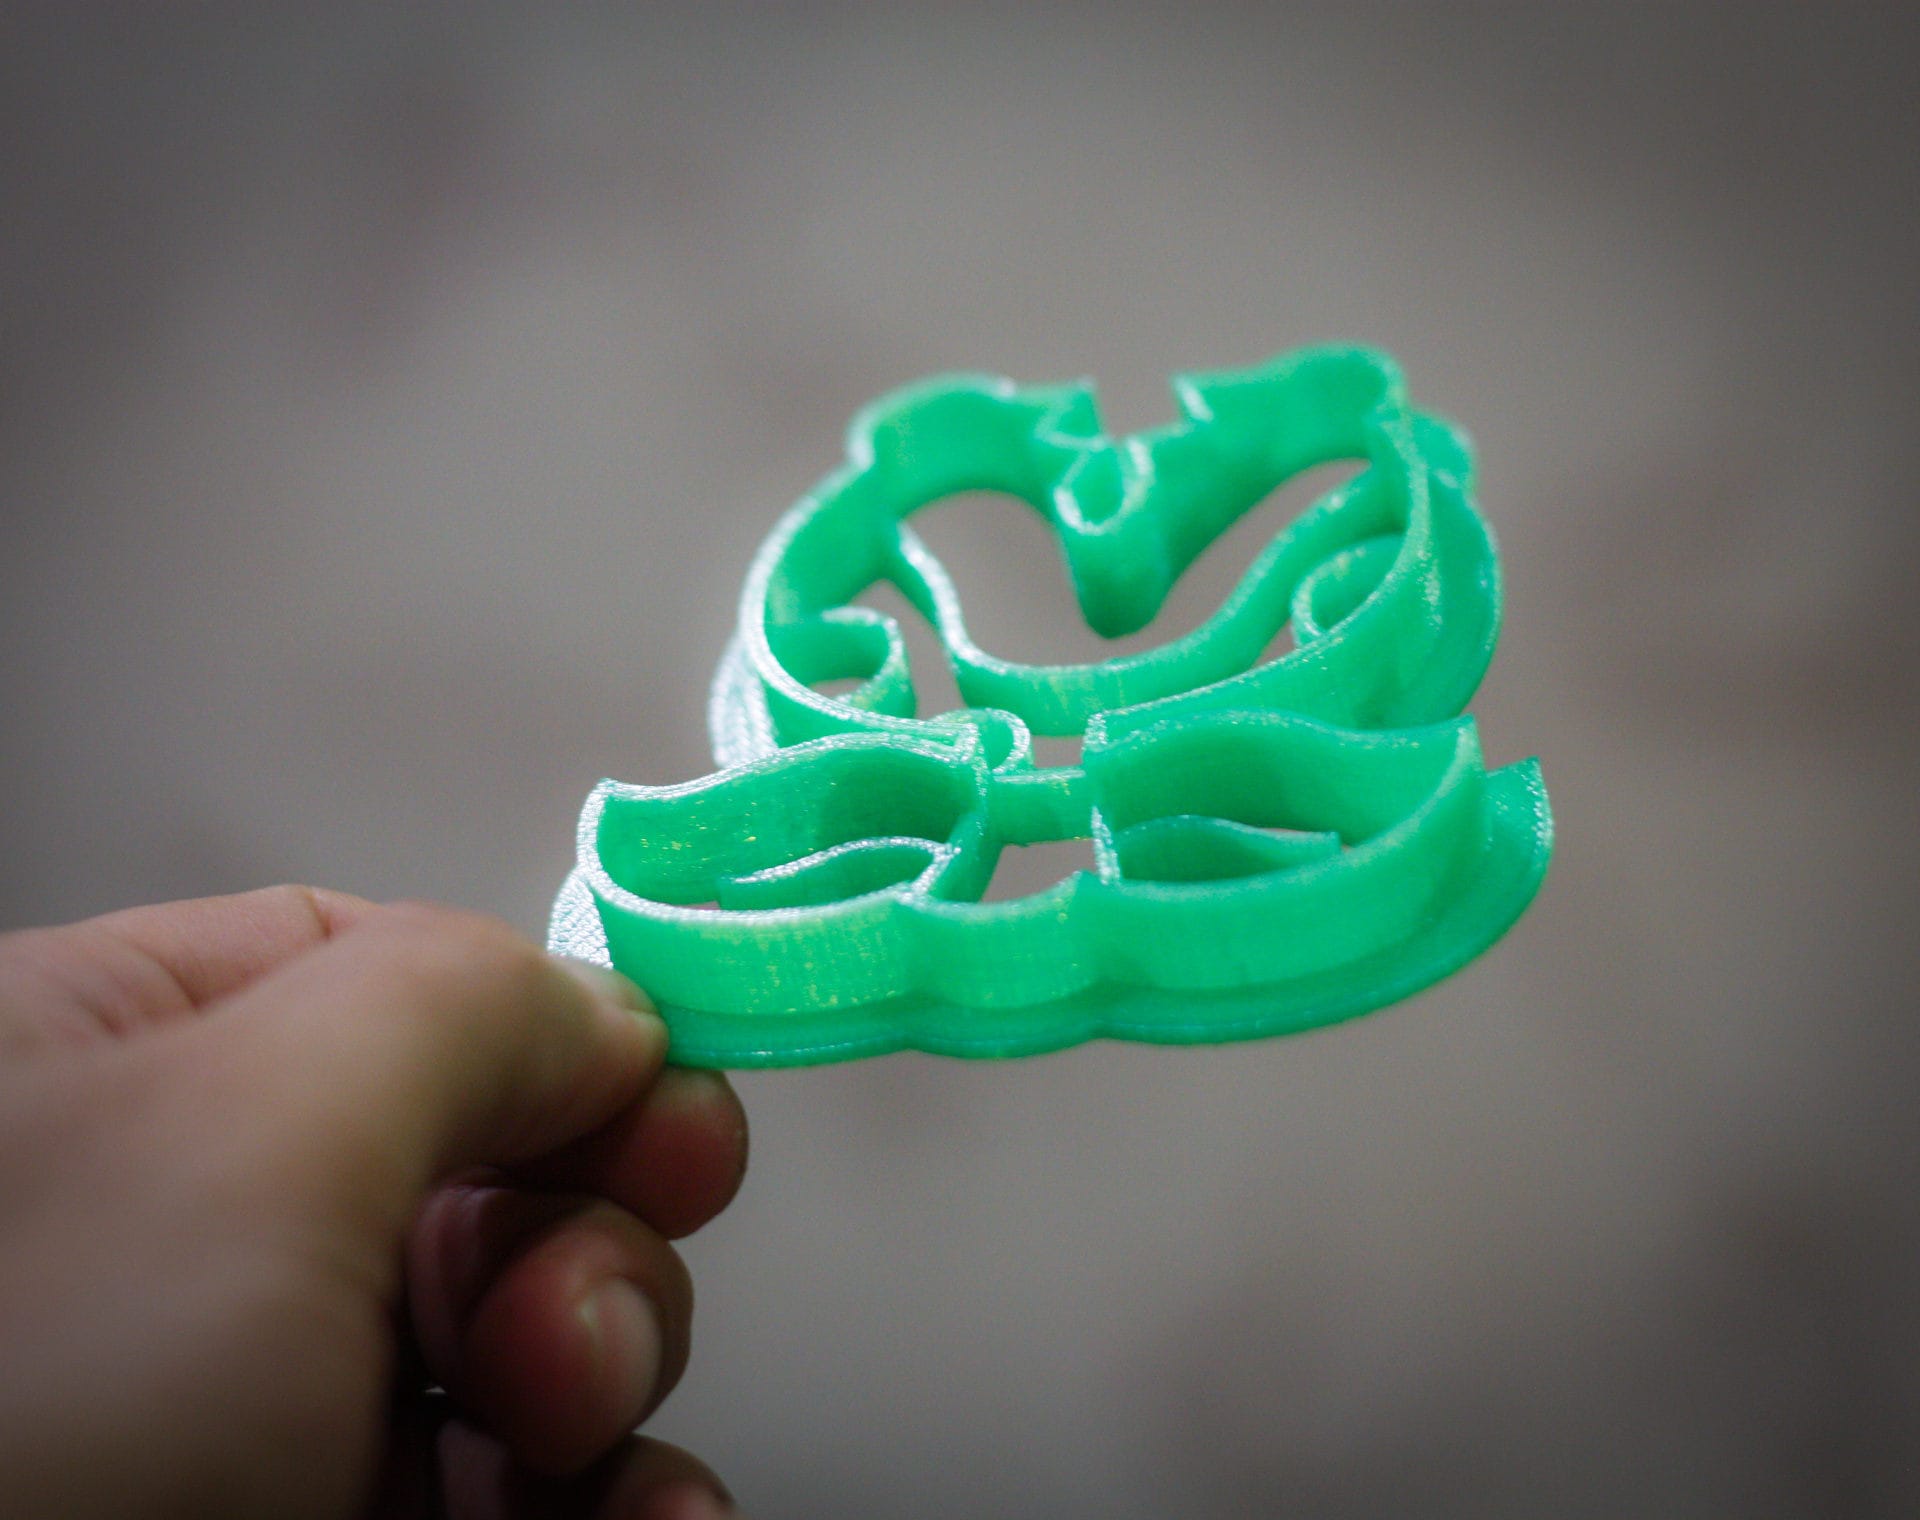 Super Mario Plant Cookie Cutter for Mario bros Birthday Party - 3DPrintProps